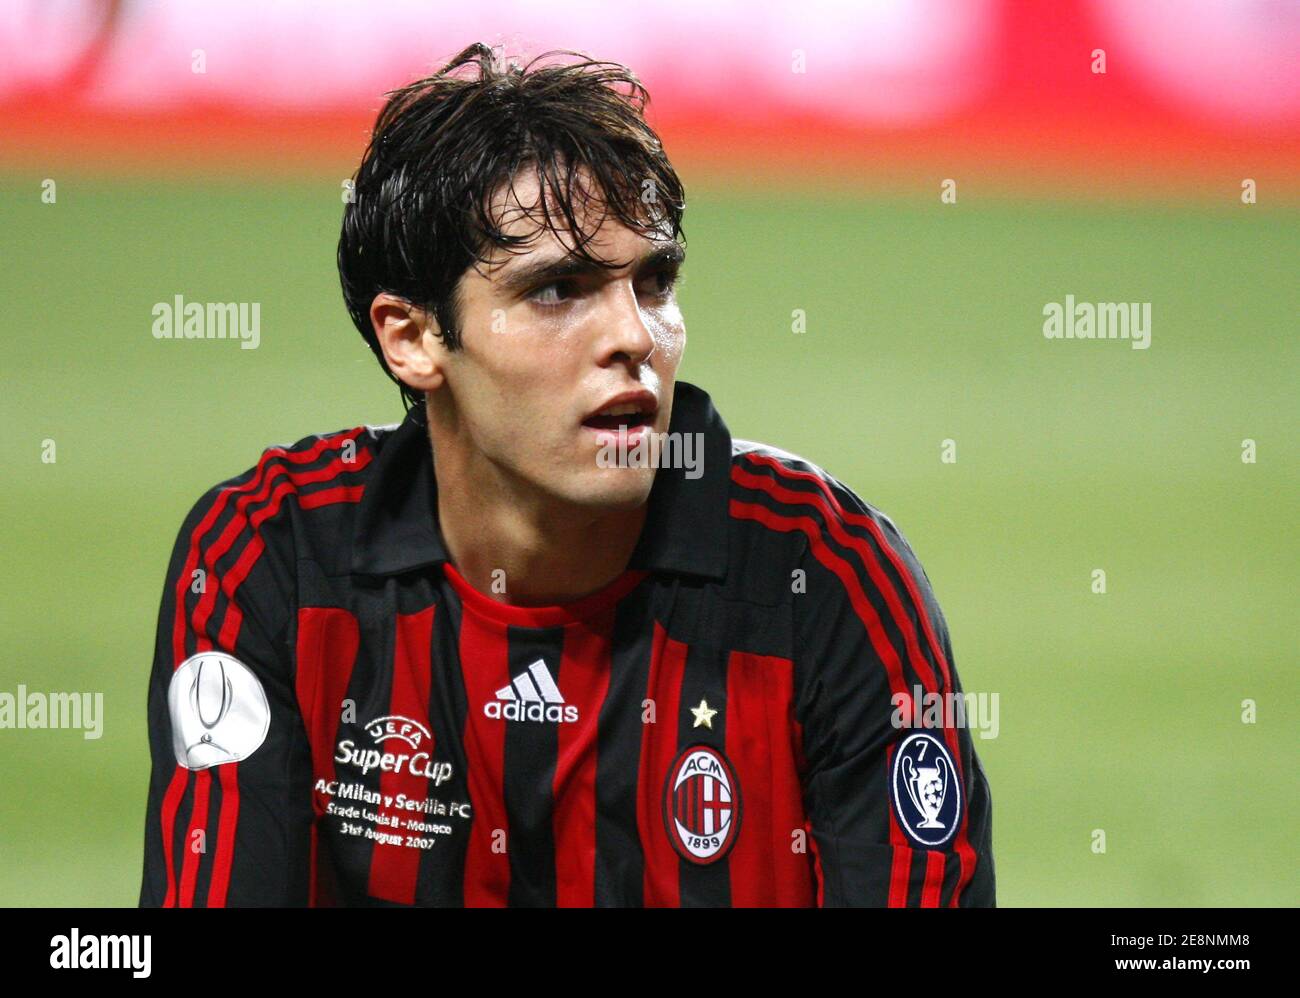 AC Milan's Kaka during the UEFA Super Cup tournament, AC Milan vs FC Sevilla  at the Louis II Stadium in Monaco on August 31, 2007. AC Milan won 3-1.  Photo by Christian